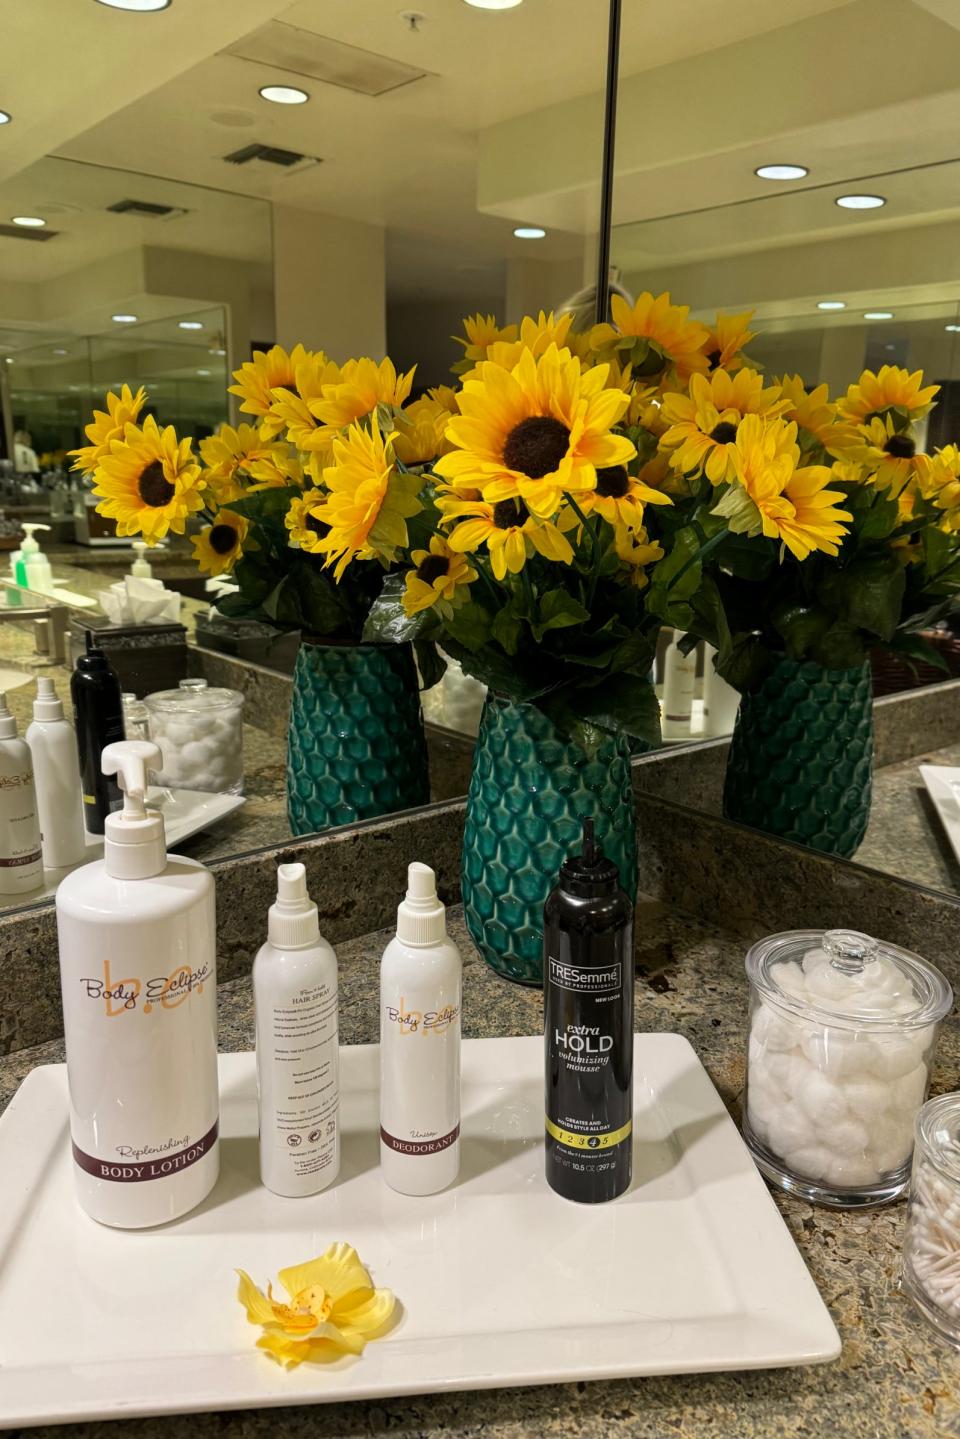 Sunflowers in a vase on a bathroom counter with various toiletry items around